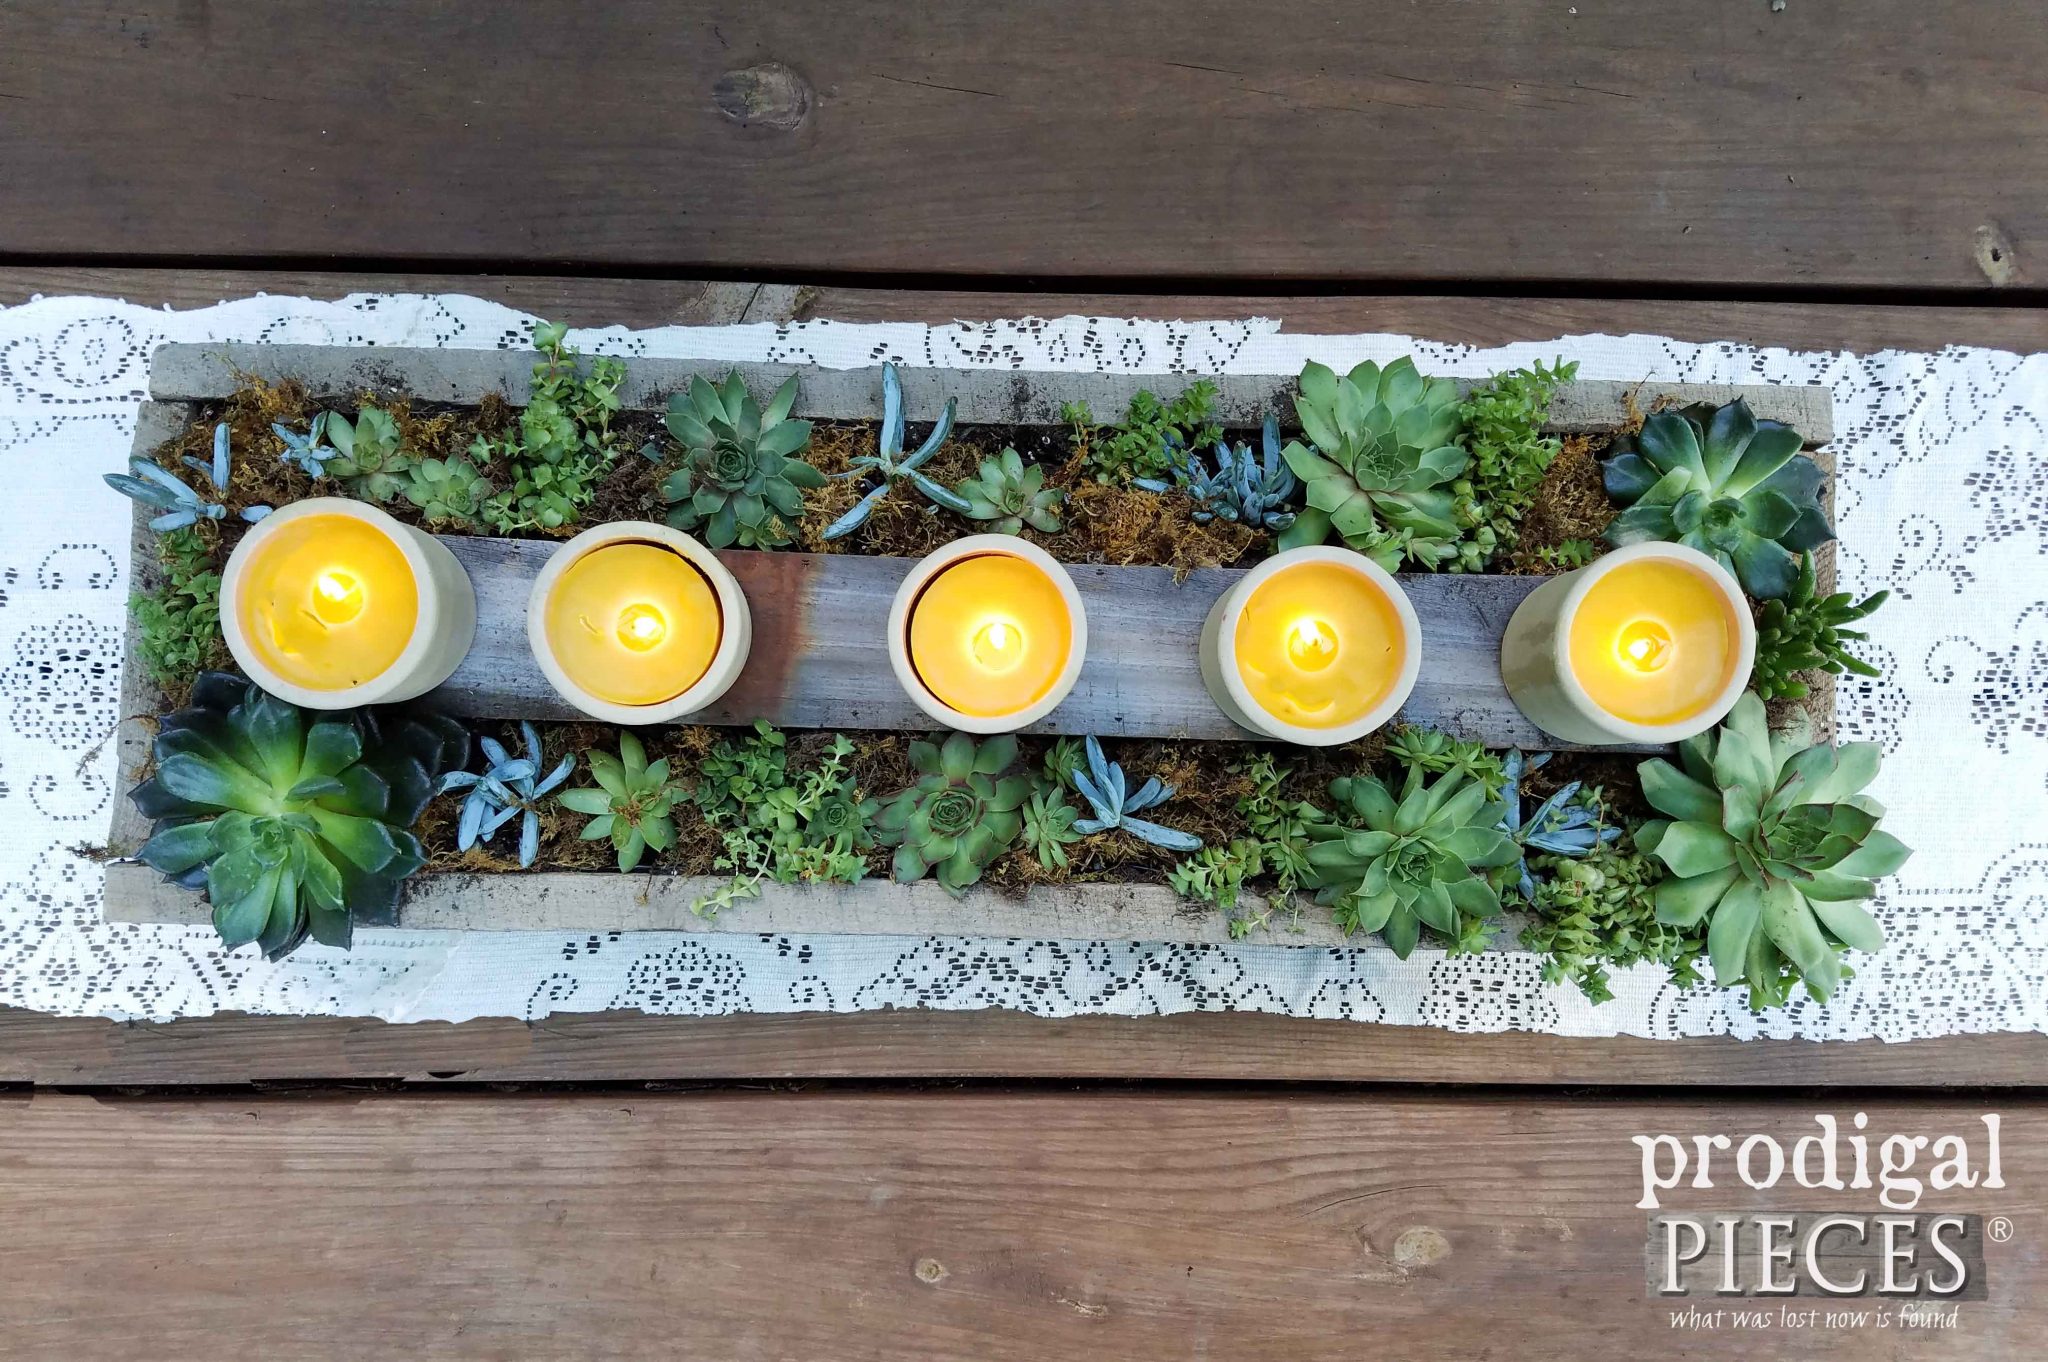 Homemade Beeswax Candles in Succulent Centerpiece by Prodigal Pieces | prodgalpieces.com